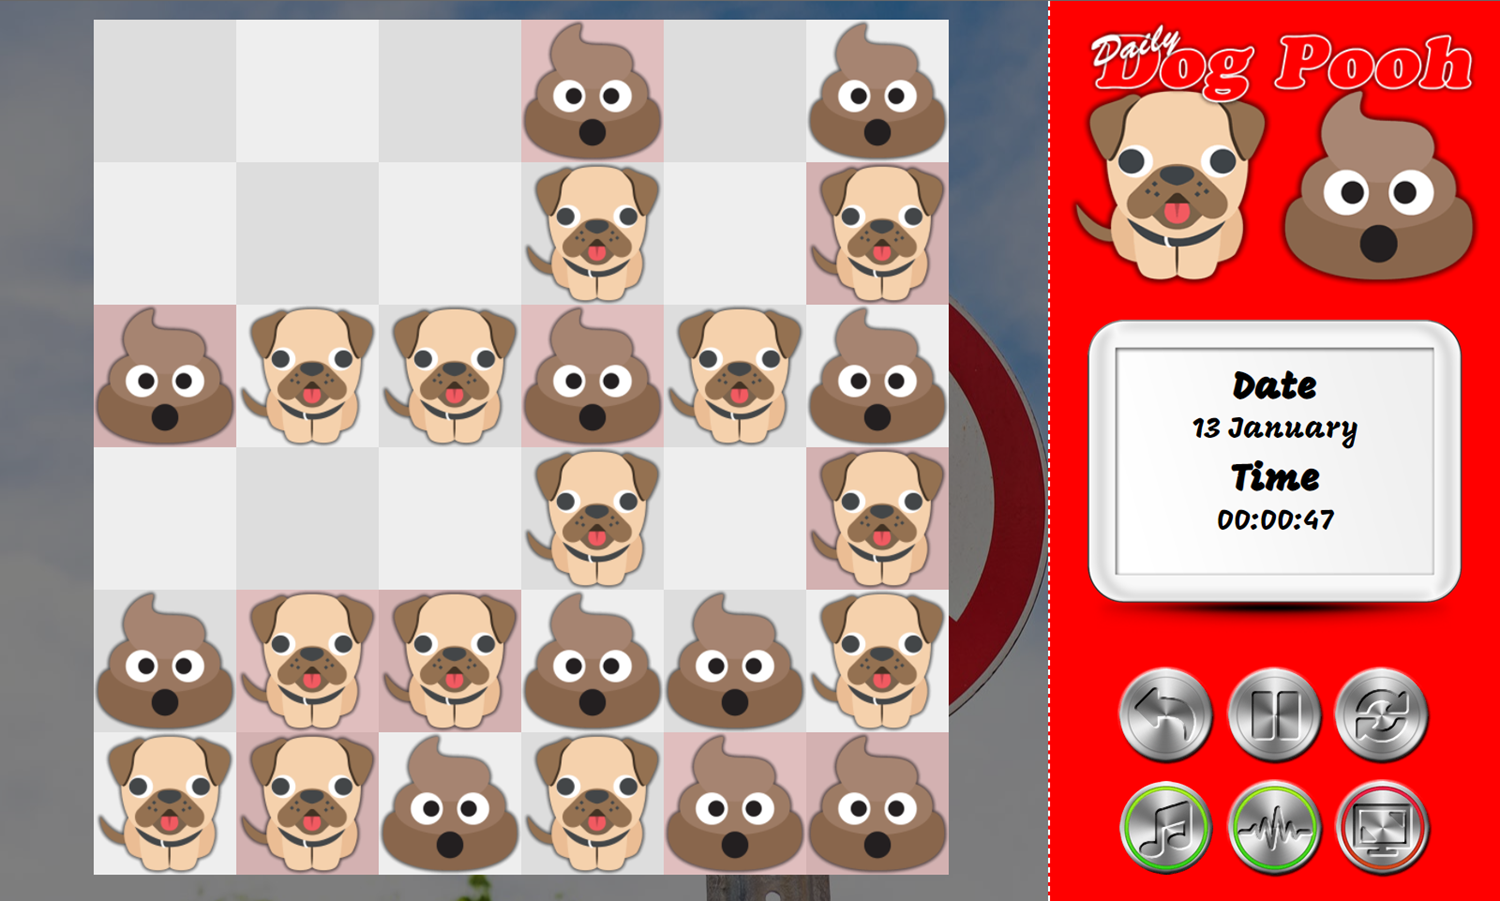 Daily Dog Pooh Game Solving Puzzle Screenshot.